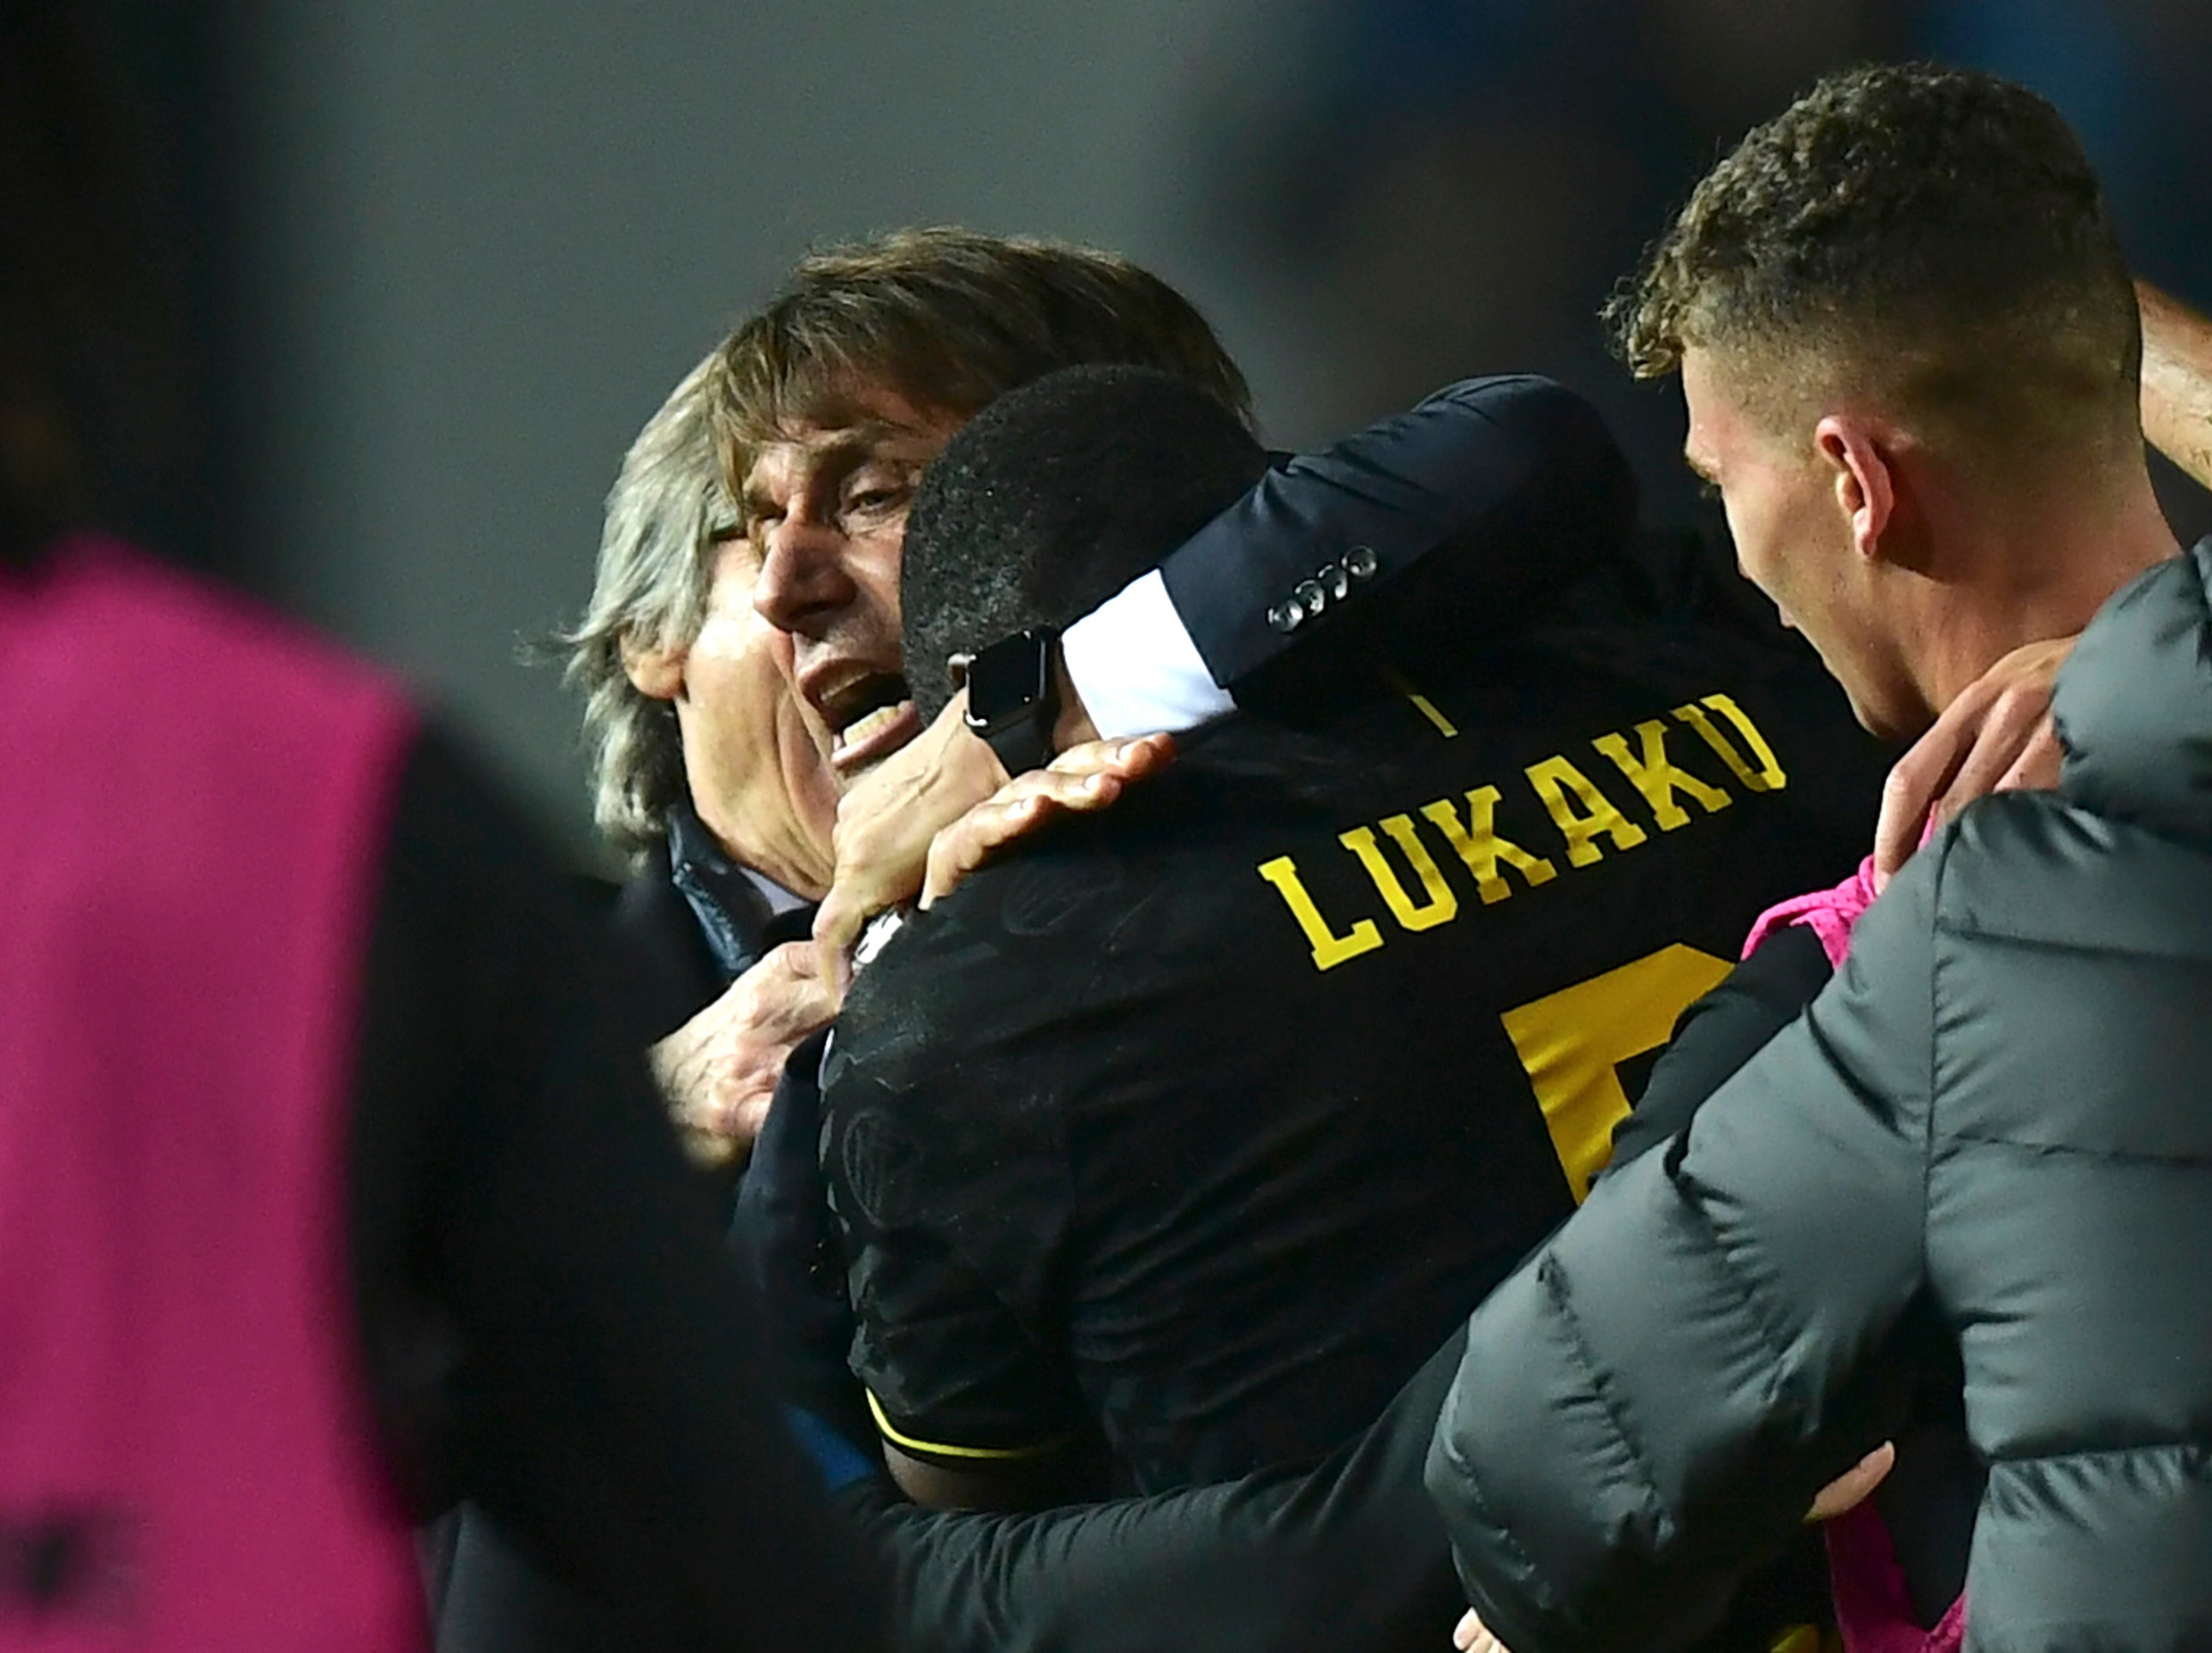 Conte embraces Lukaku after the latter's goal